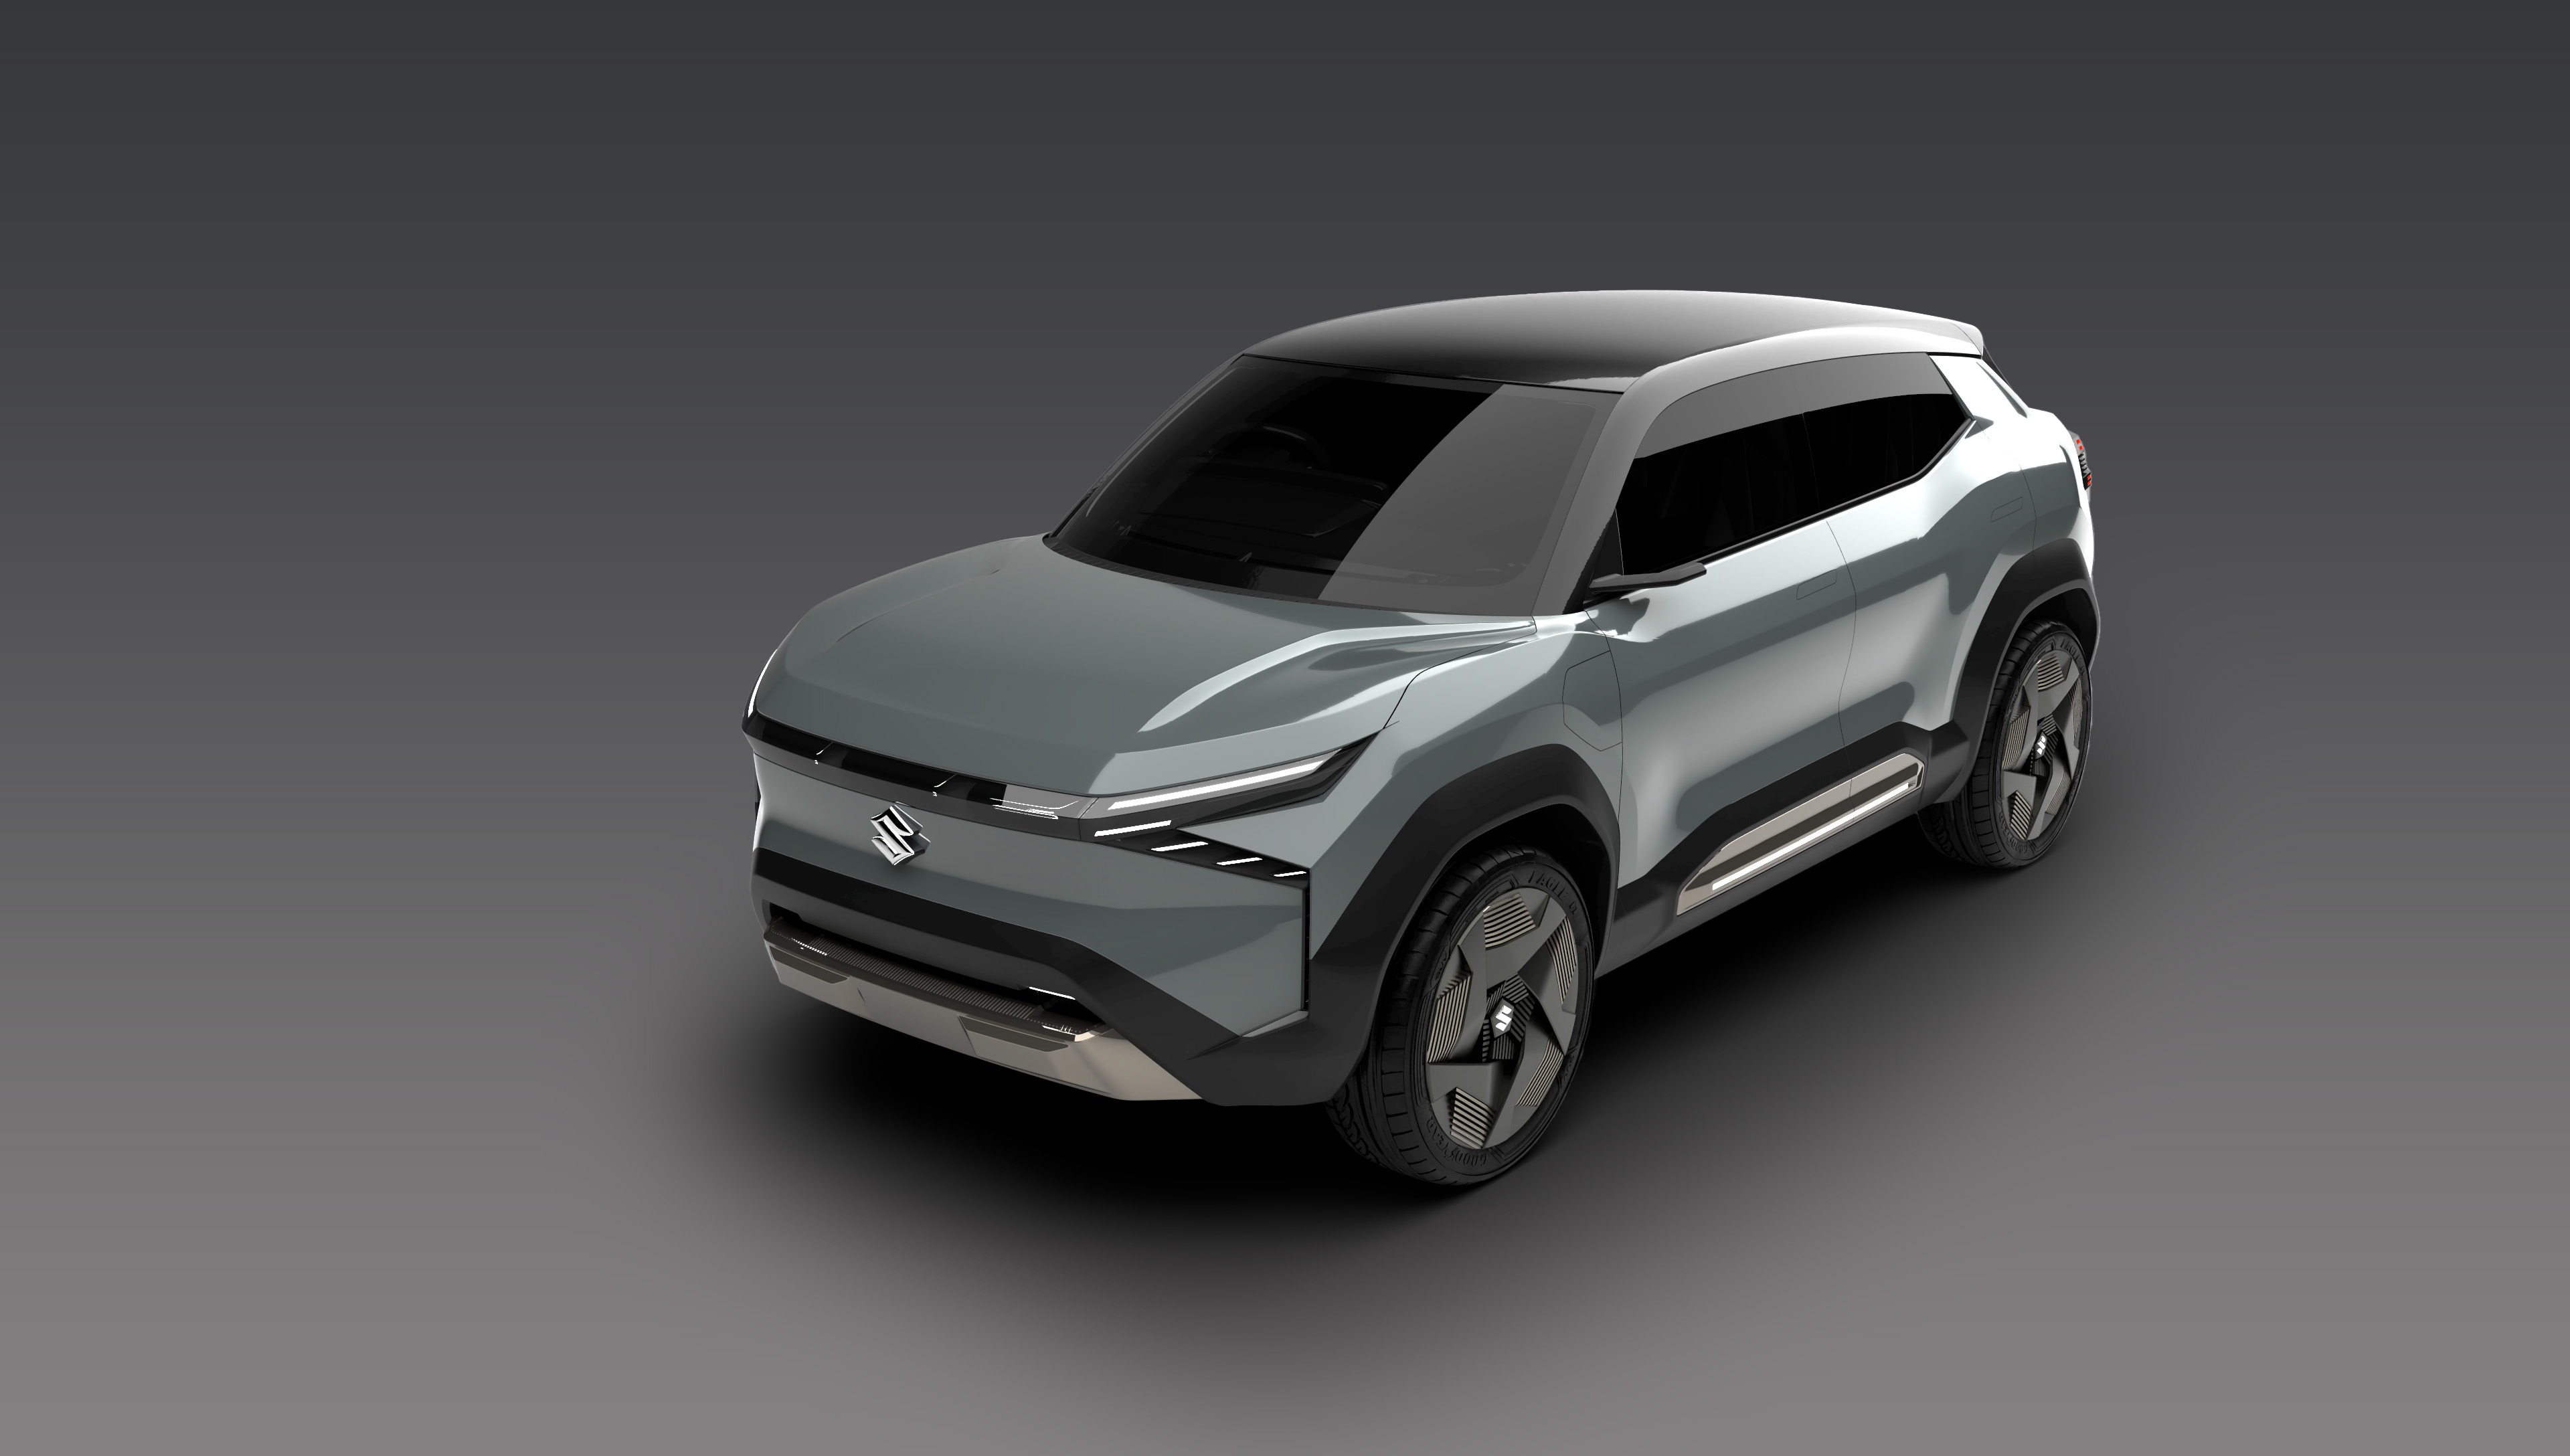 Fully electric Suzuki concept model revealed